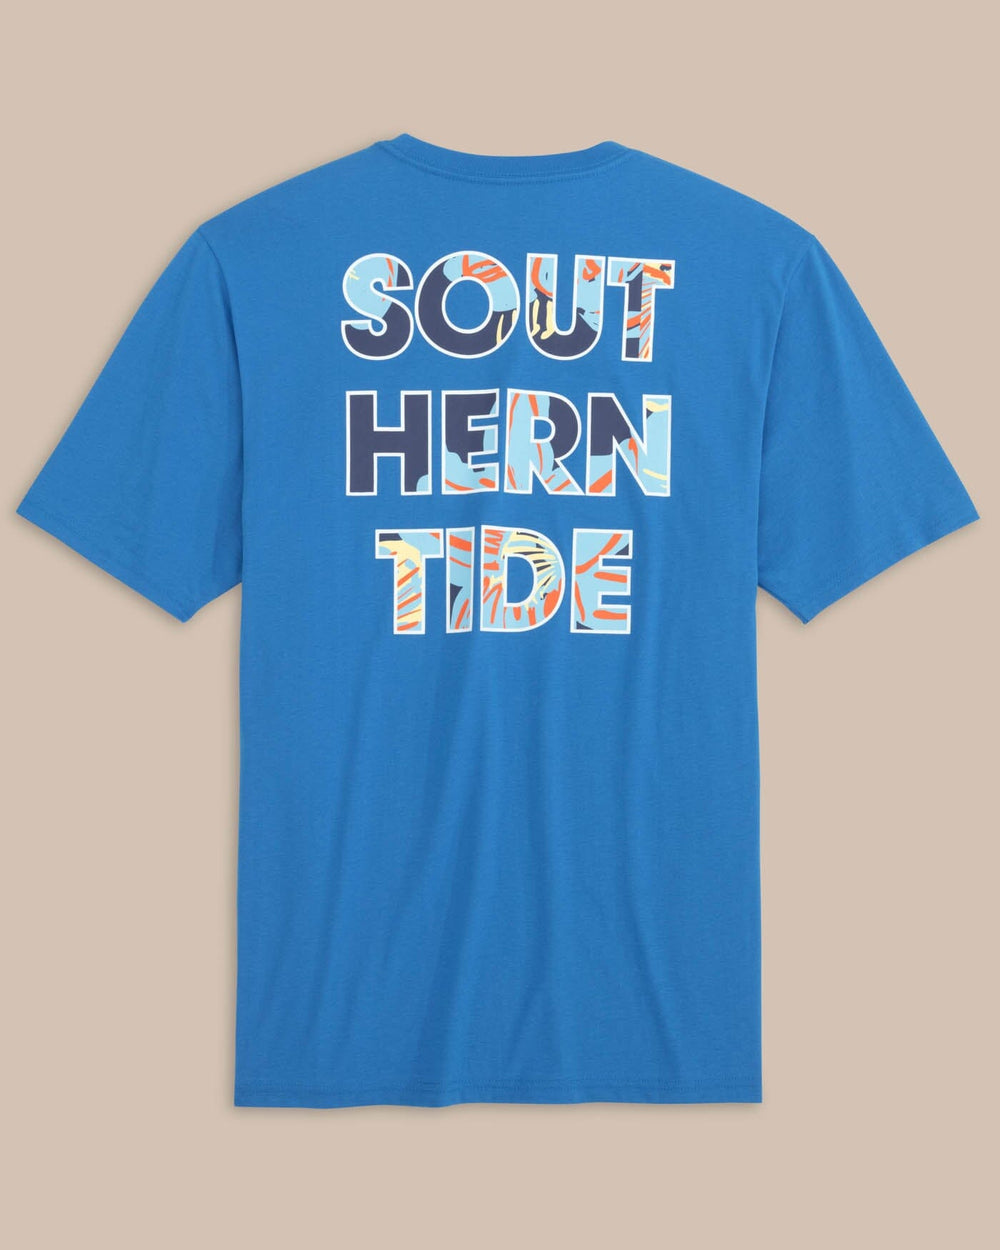 The back view of the Southern Tide ST Stack Short Sleeve T-Shirt by Southern Tide - Mediterranean Blue